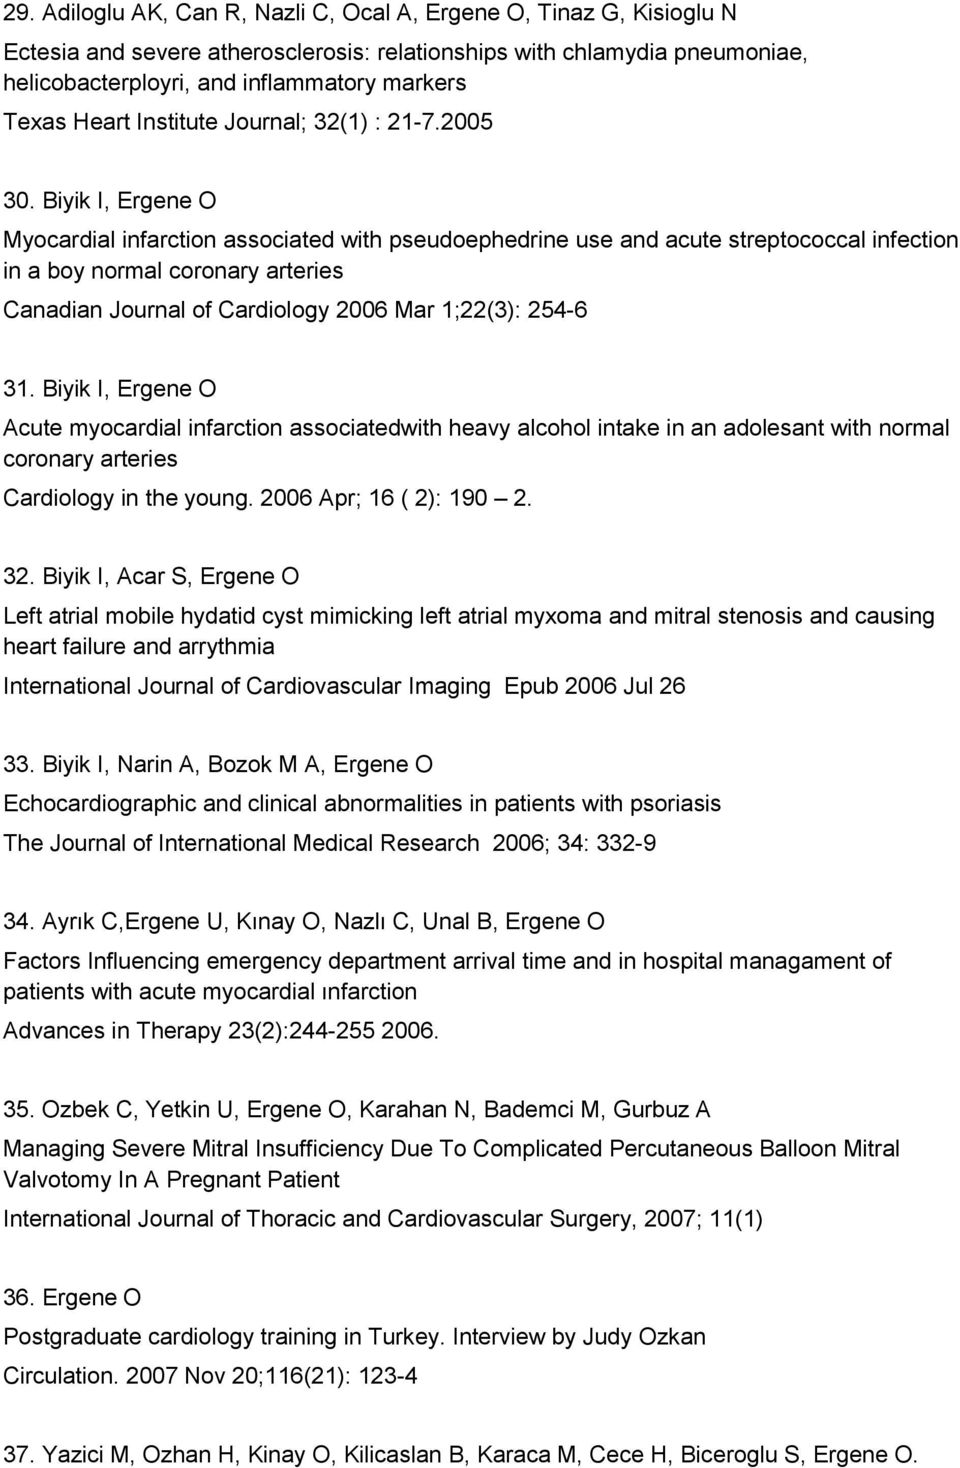 Biyik I, Ergene O Myocardial infarction associated with pseudoephedrine use and acute streptococcal infection in a boy normal coronary arteries Canadian Journal of Cardiology 2006 Mar 1;22(3): 254-6